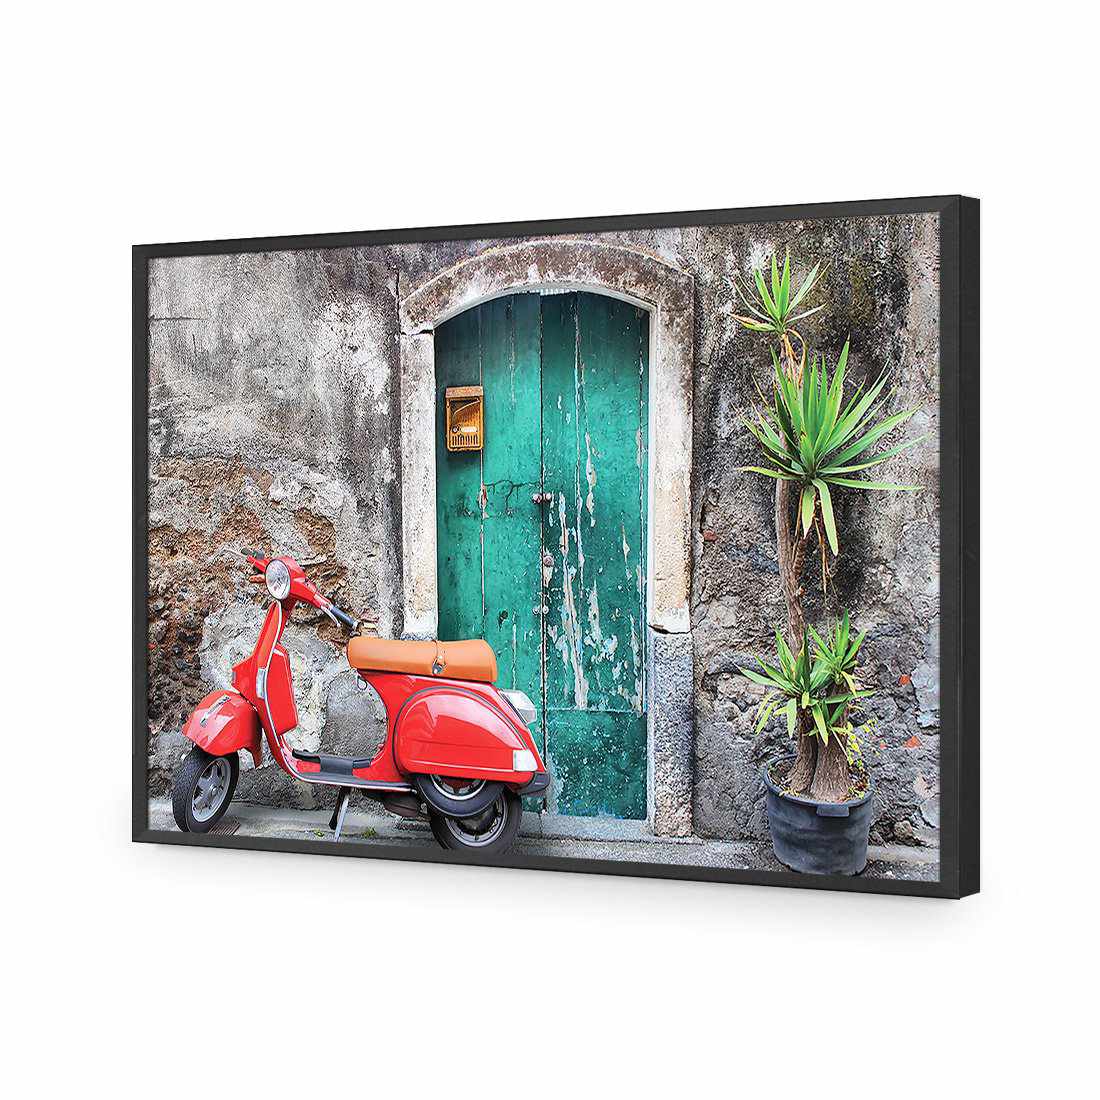 Vintage Door And Scooter-Acrylic-Wall Art Design-Without Border-Acrylic - Black Frame-45x30cm-Wall Art Designs